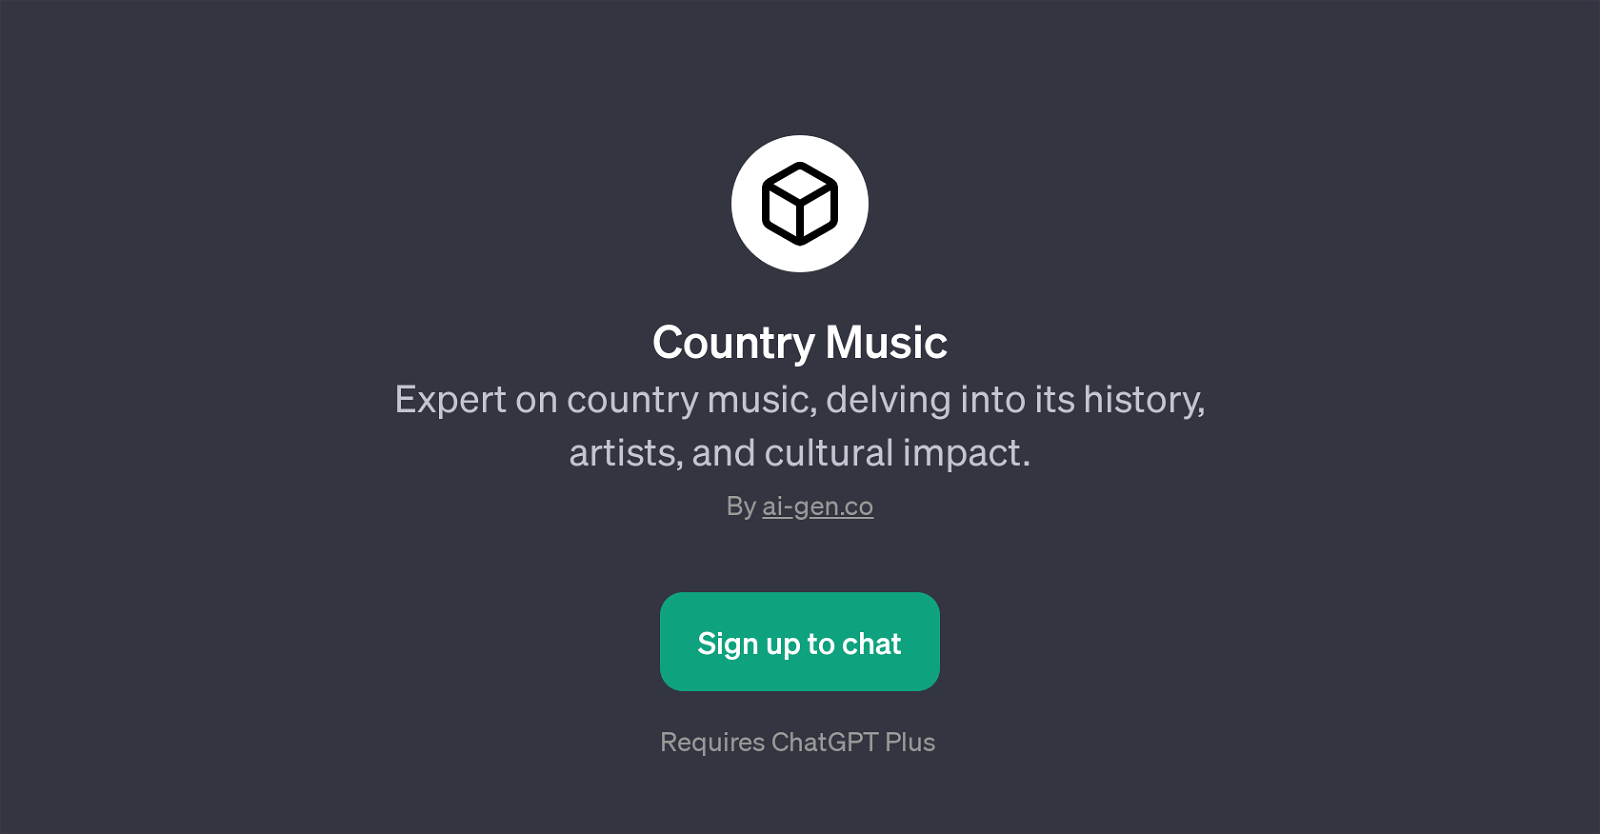 Country Music website